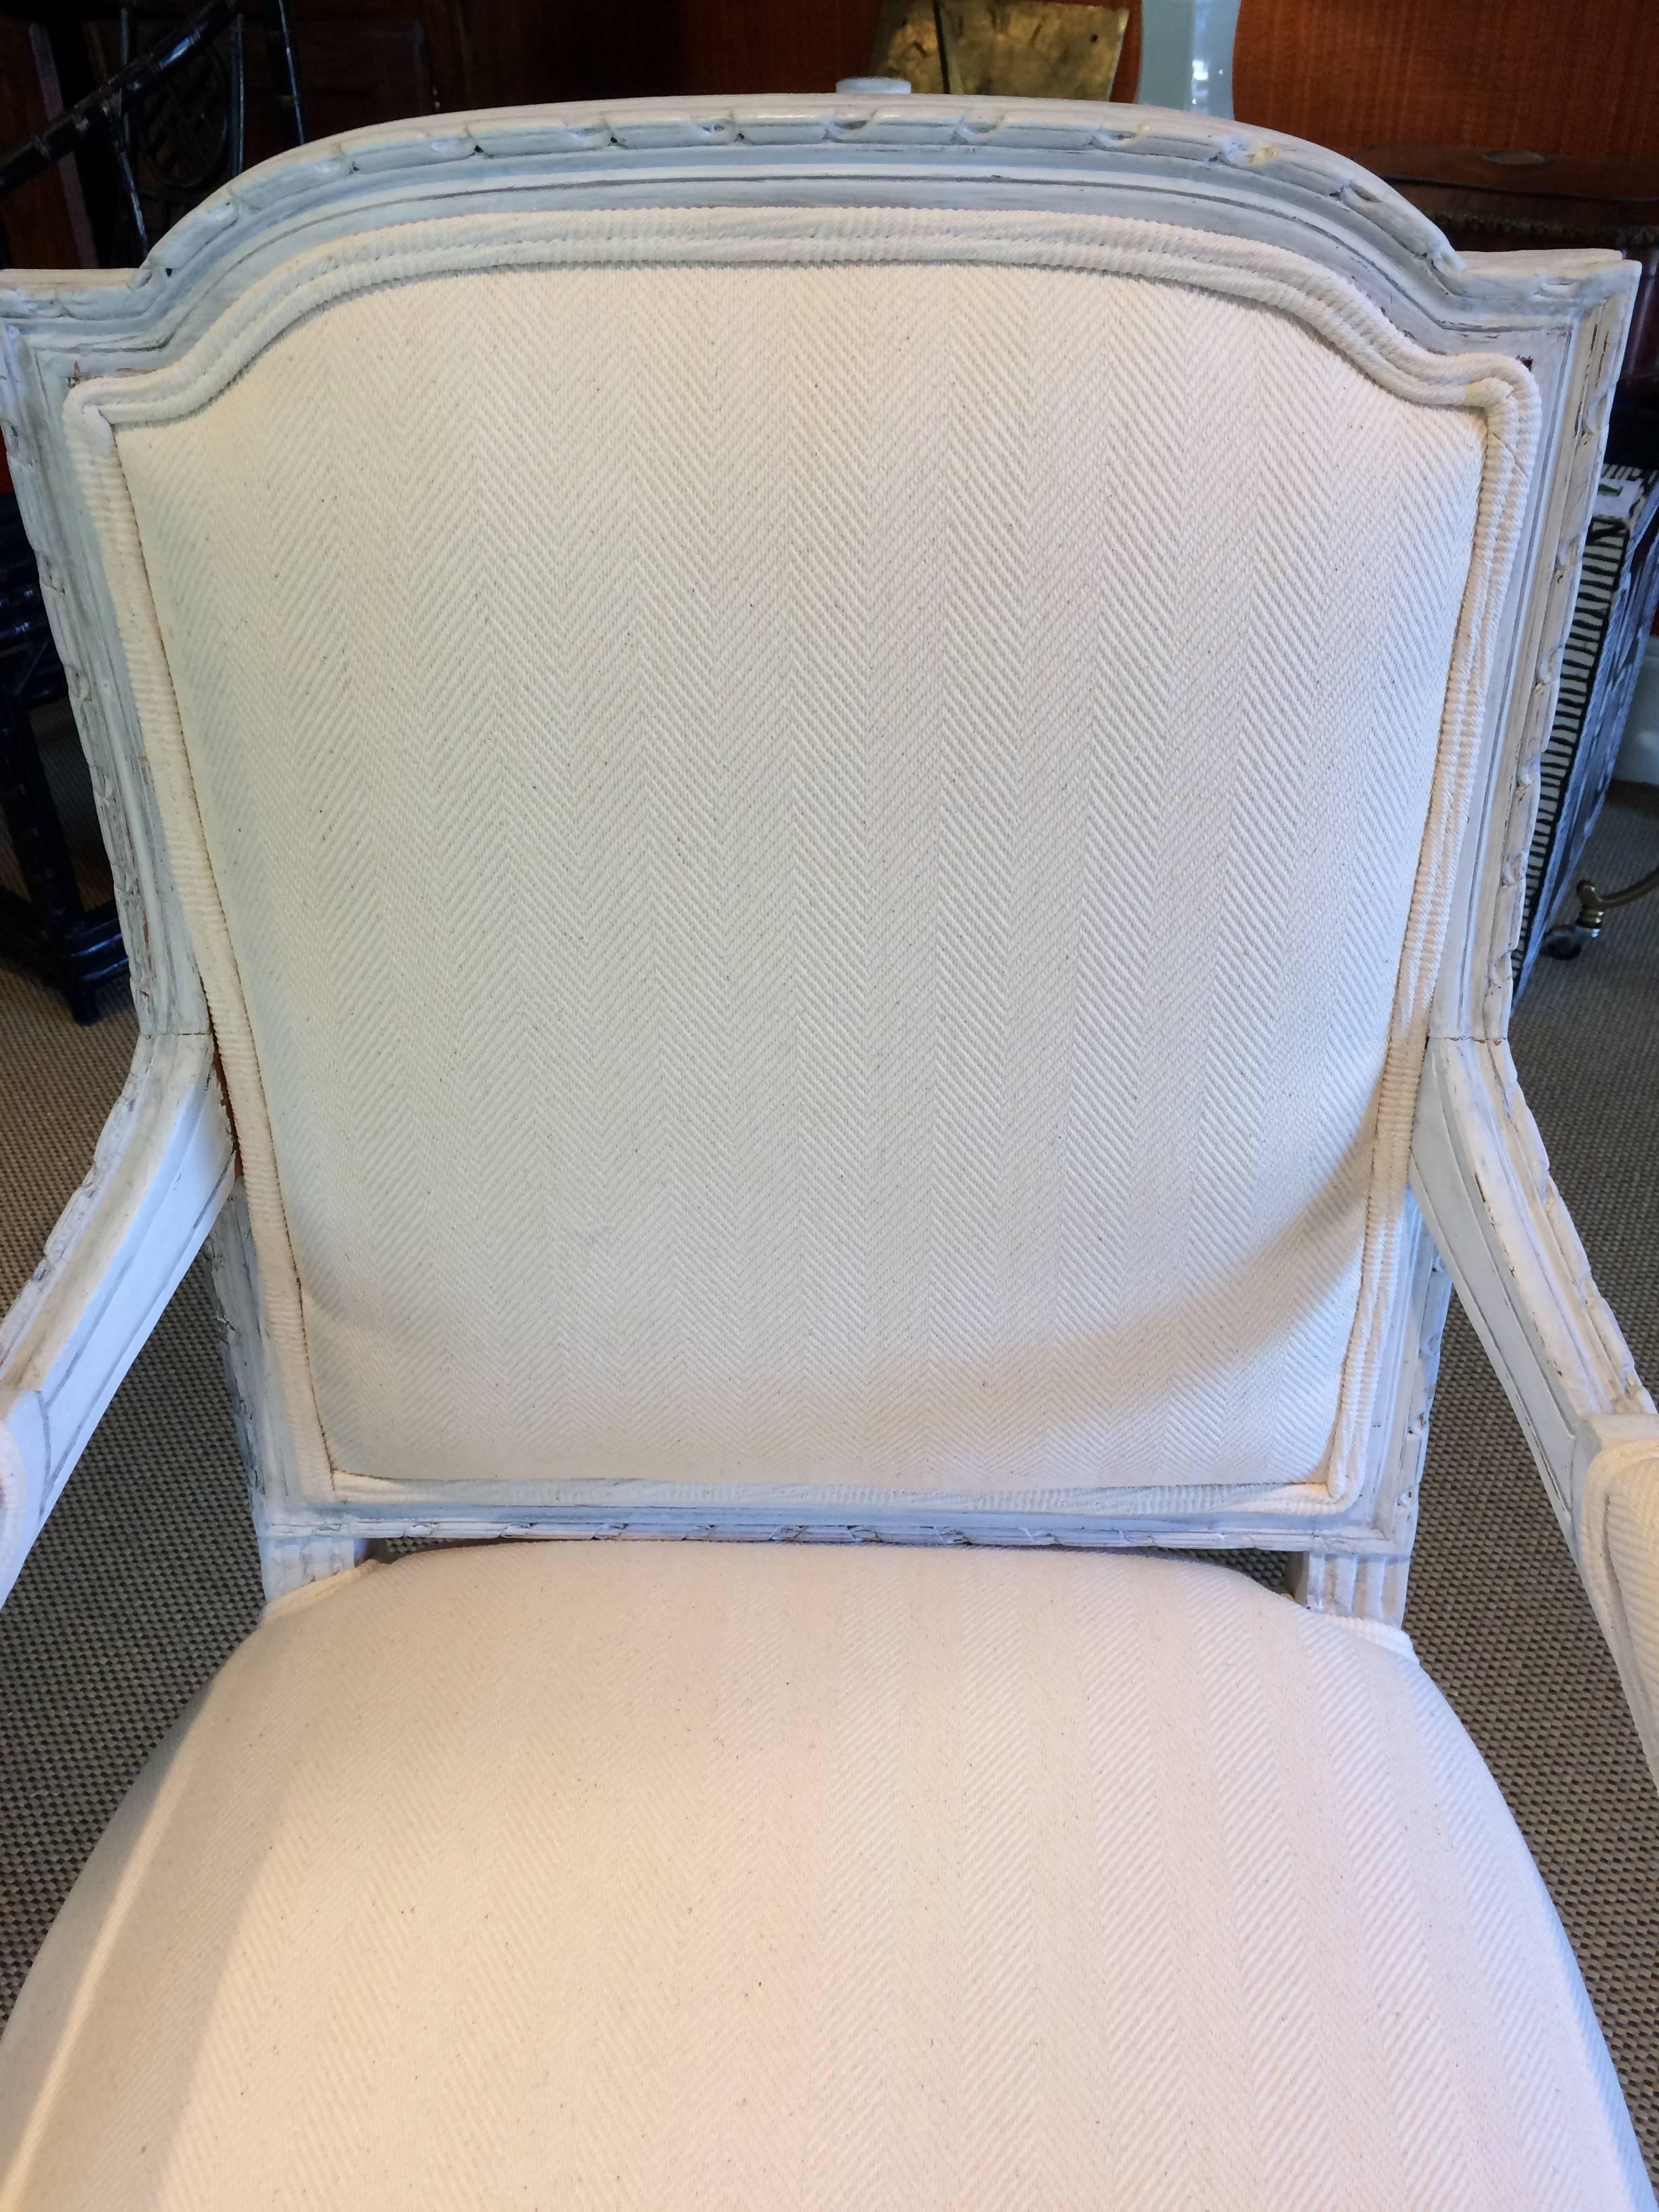 Two sublime French armchairs having painted carved wood frames with acanthus leaves and reeded legs, in a soft Gustavian grey. Newly redone in tone on tone off white herringbone cotton canvas fabric. Seat height 20
arm height 28.5.